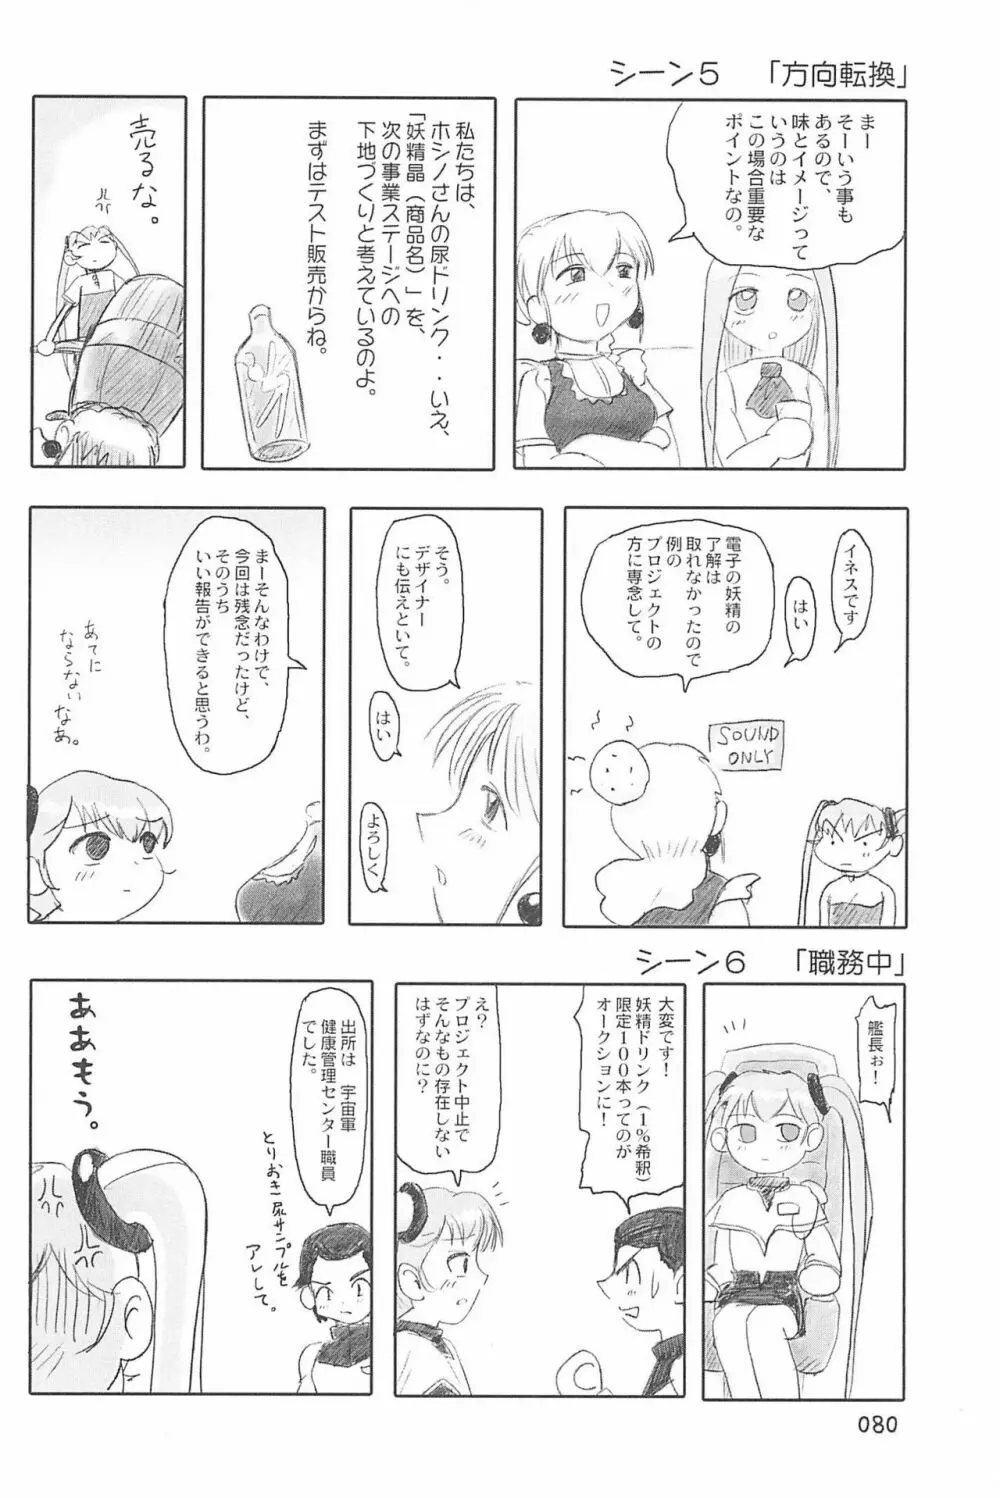 ND-special Volume 4 80ページ